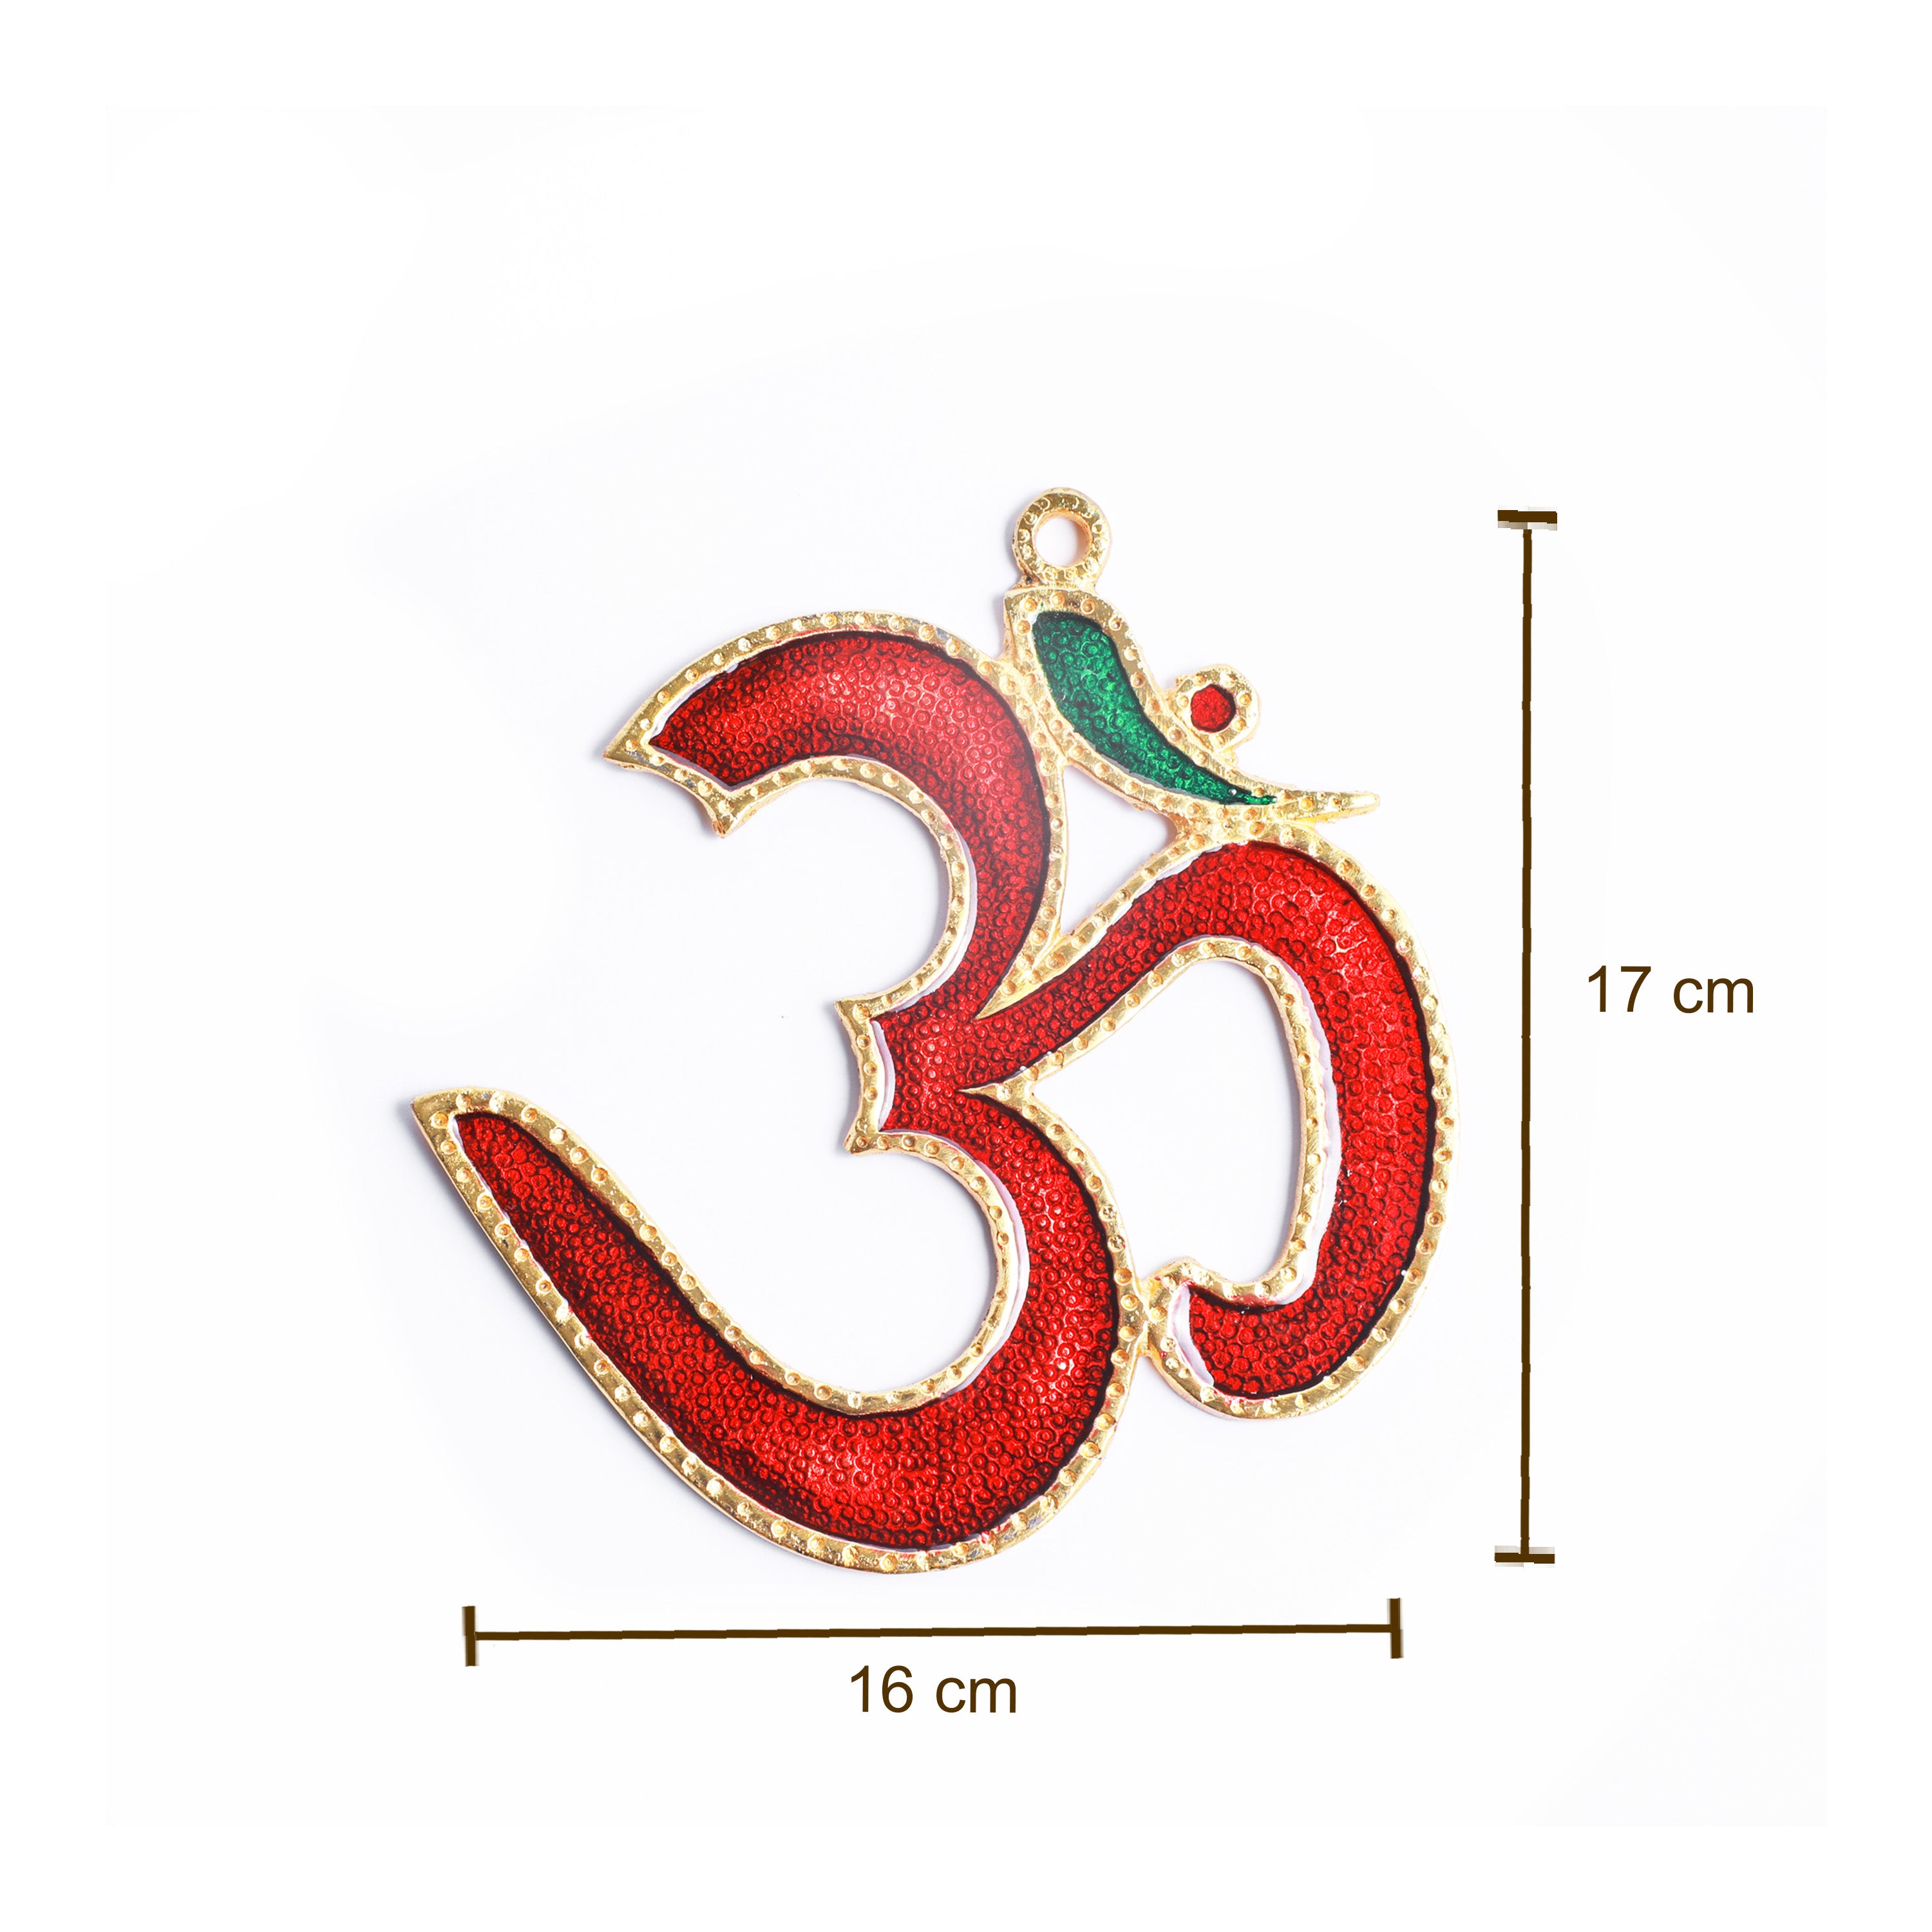 OM pendant for entryway and pooja room decor